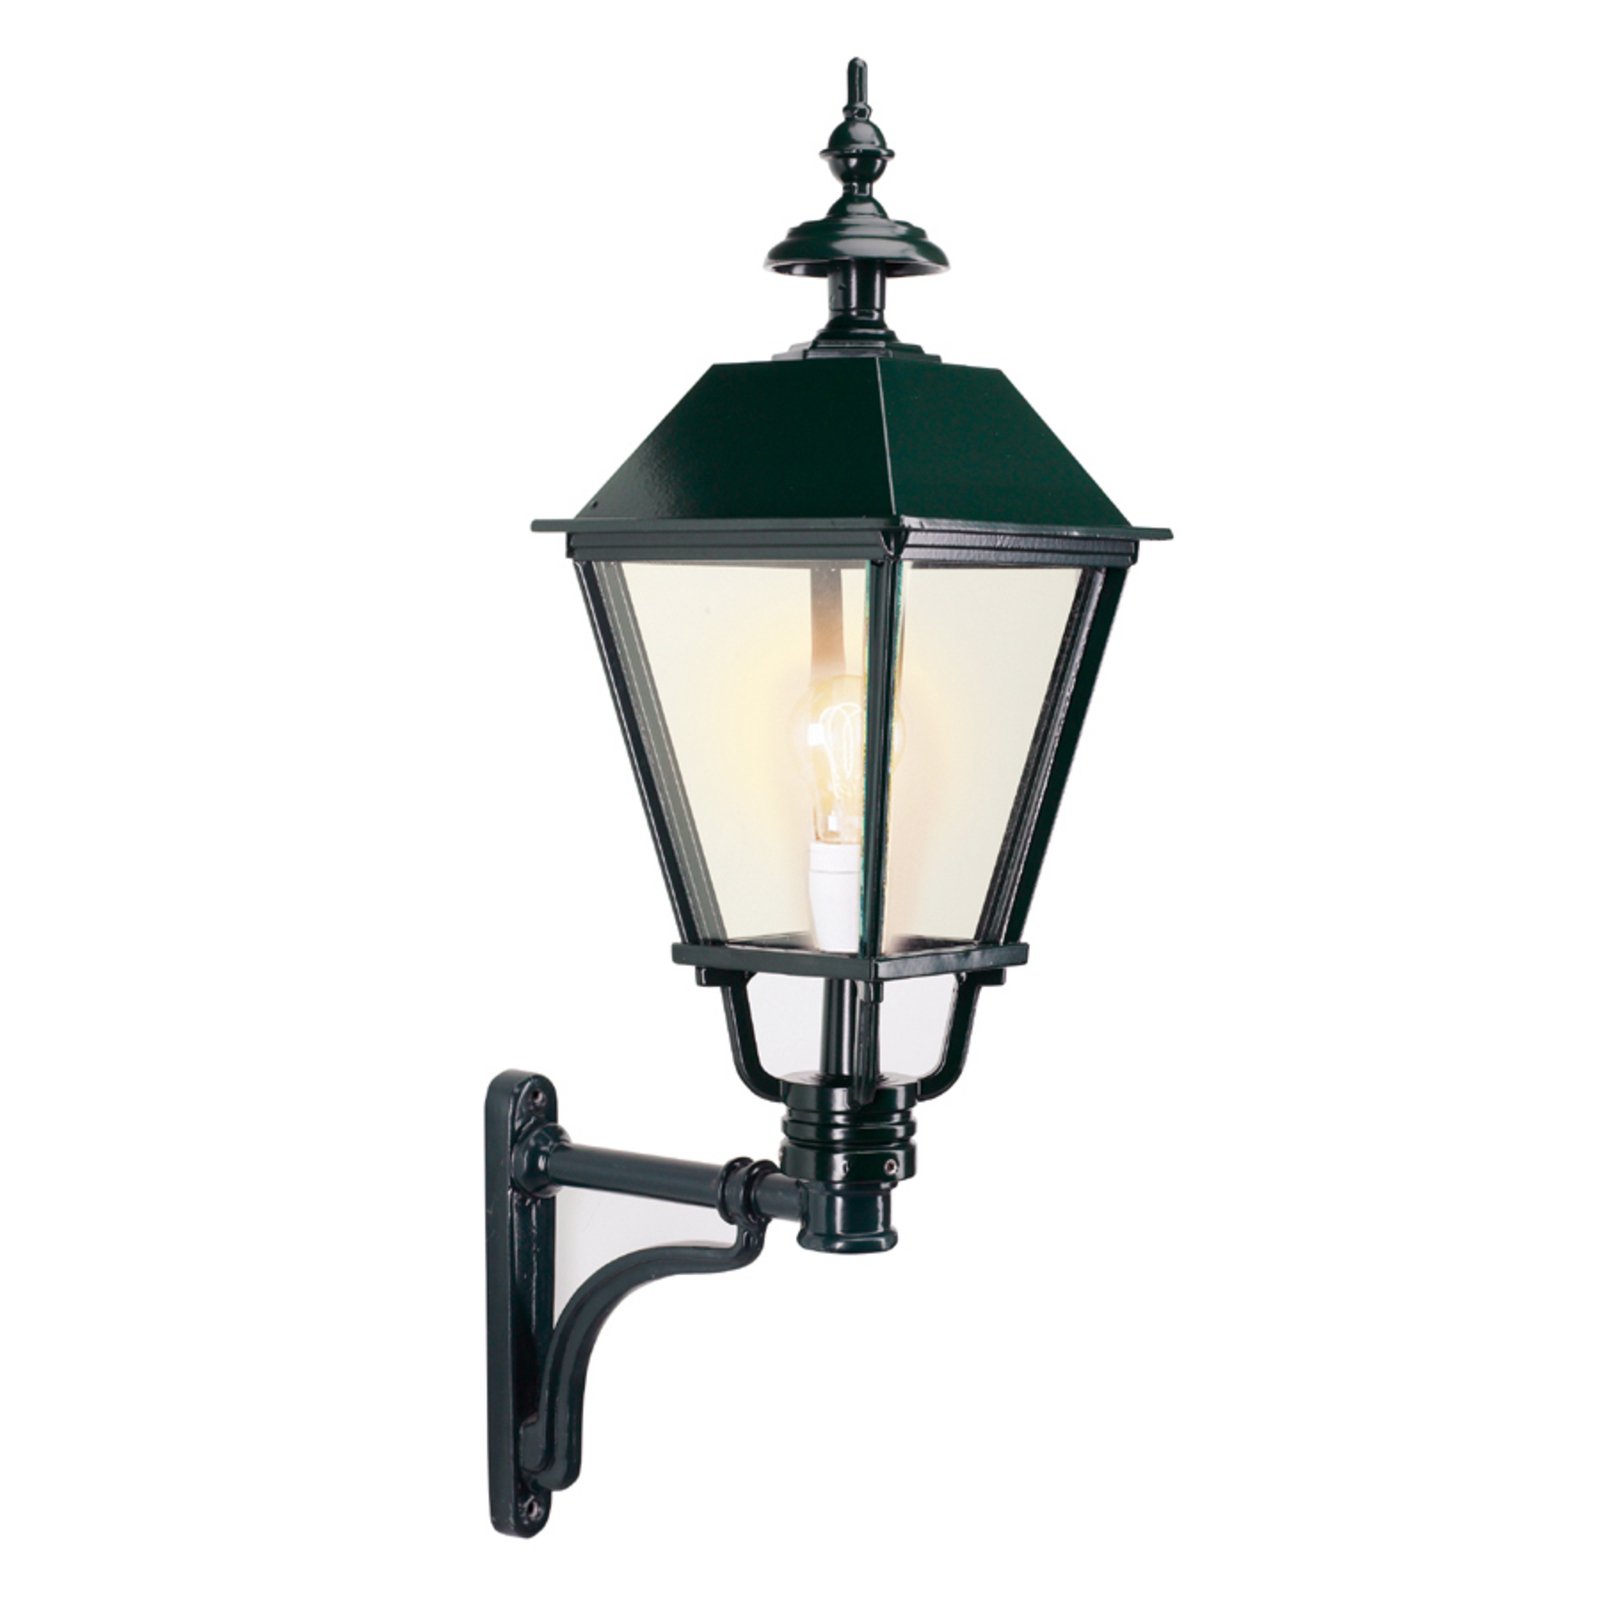 Classic outdoor wall light Eemnes, black